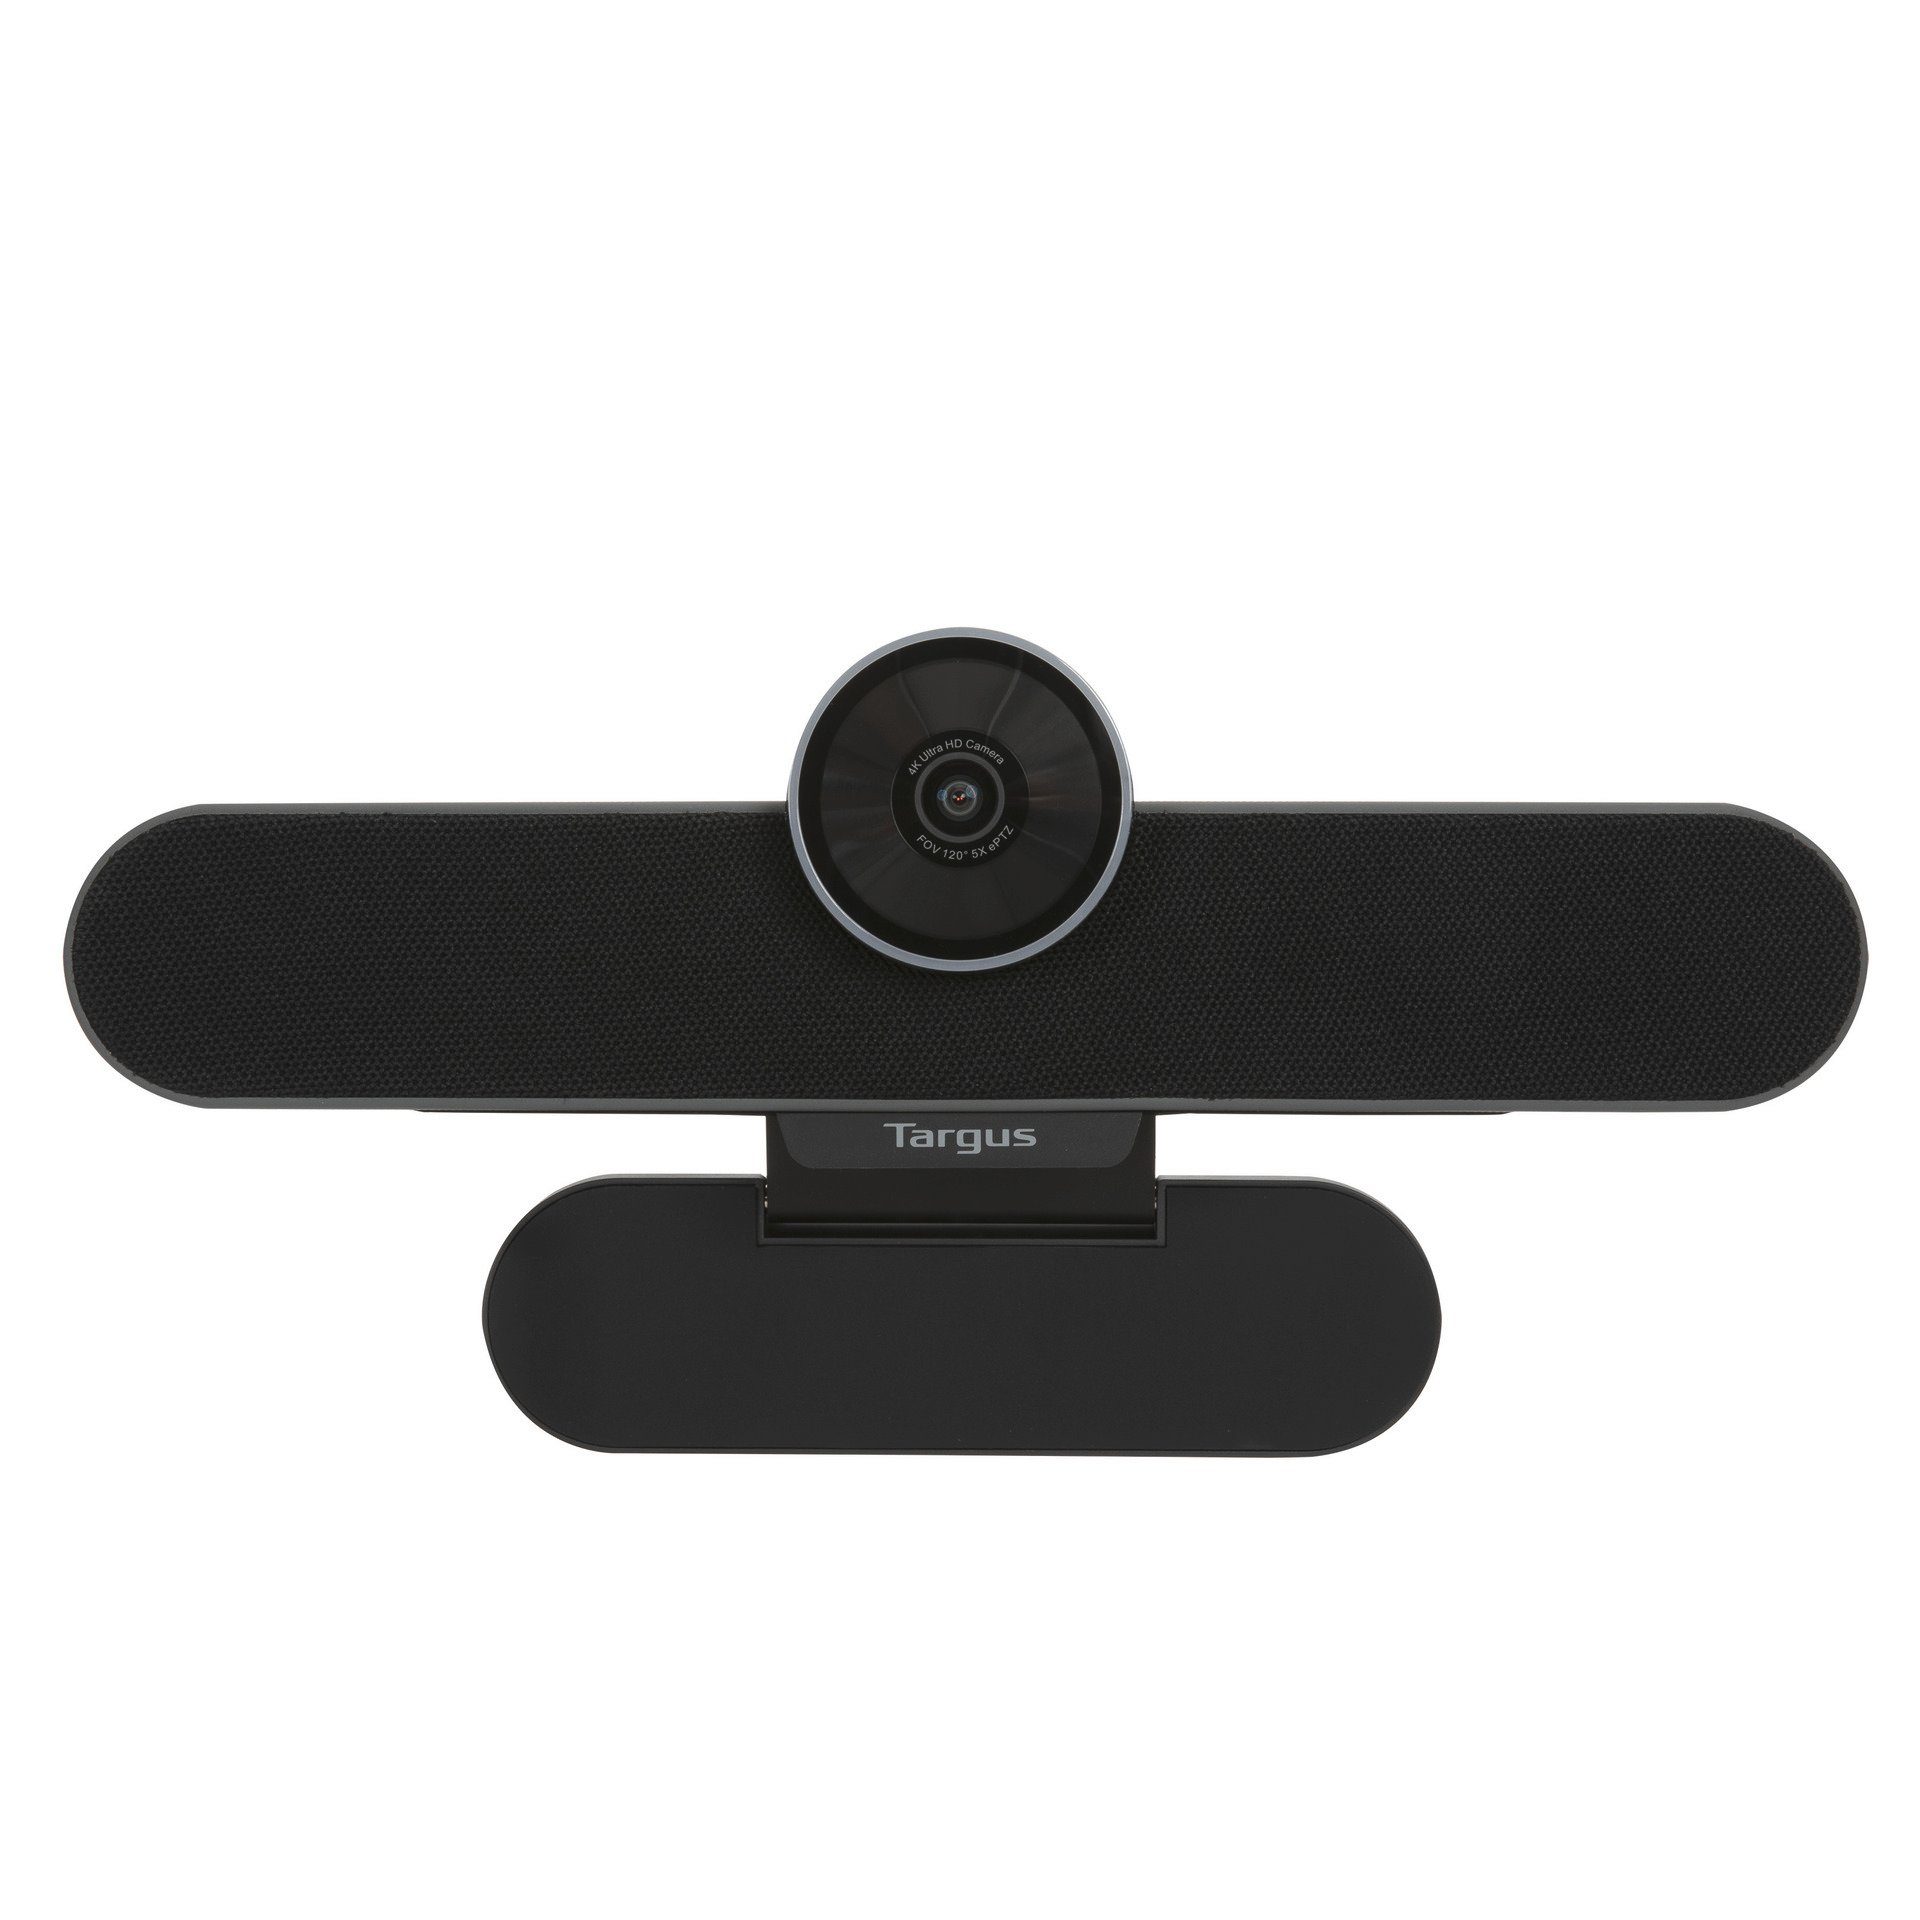 Targus All-in-One 4K Conference (4K Ultra HD, System Mit Netzteil) Webcam EU